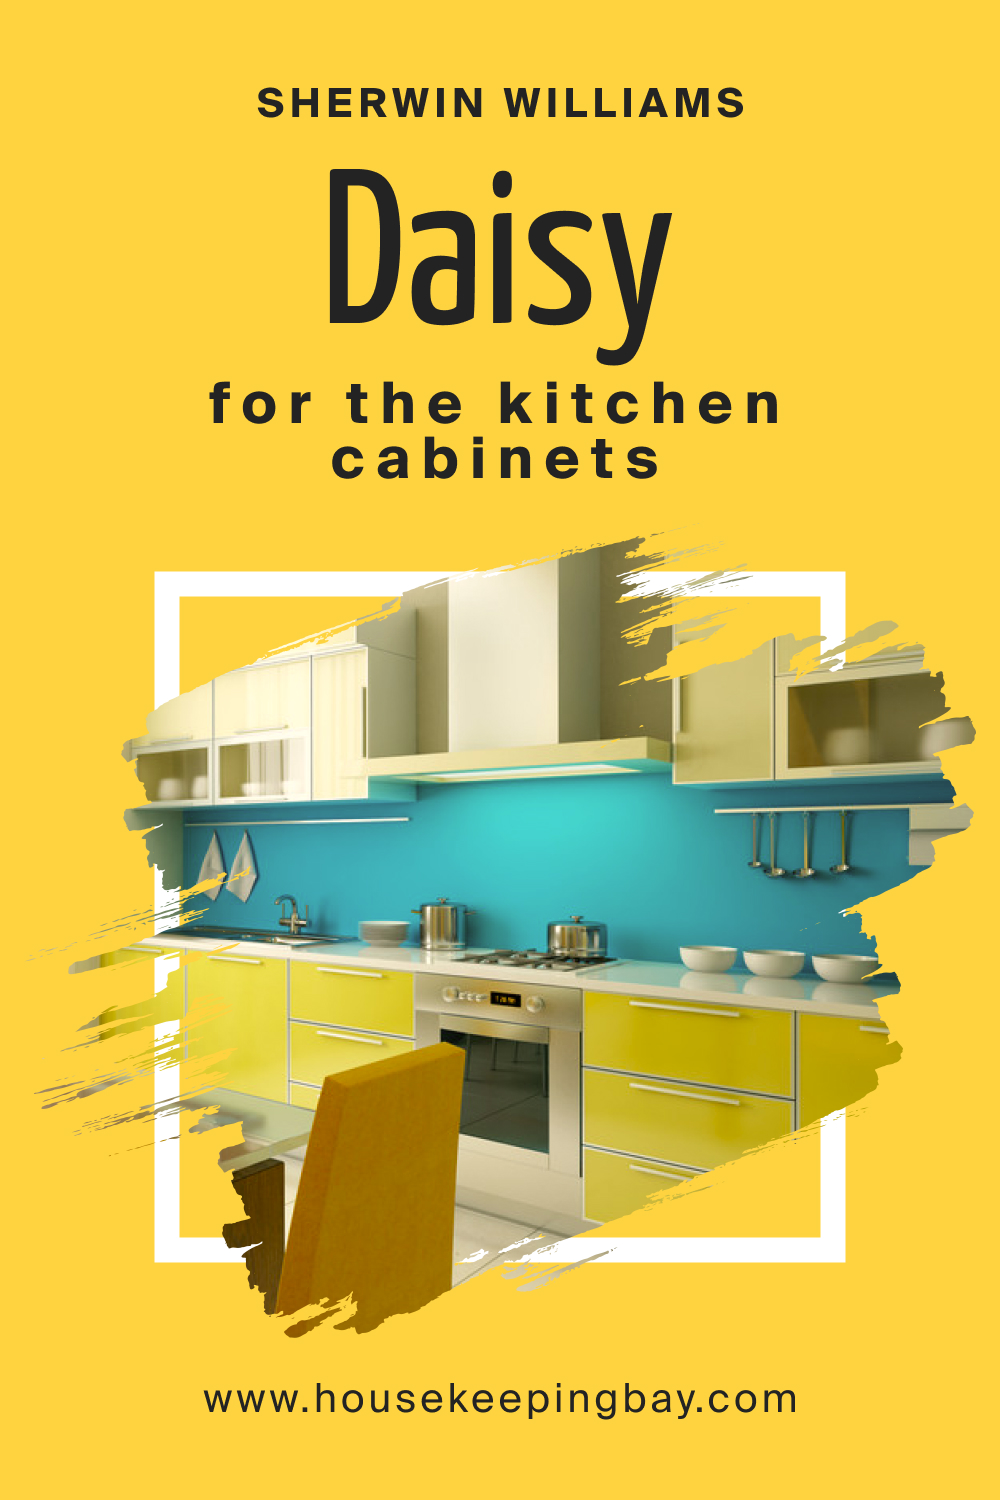 Sherwin Williams. Daisy SW 6910 For the Kitchen Cabinets